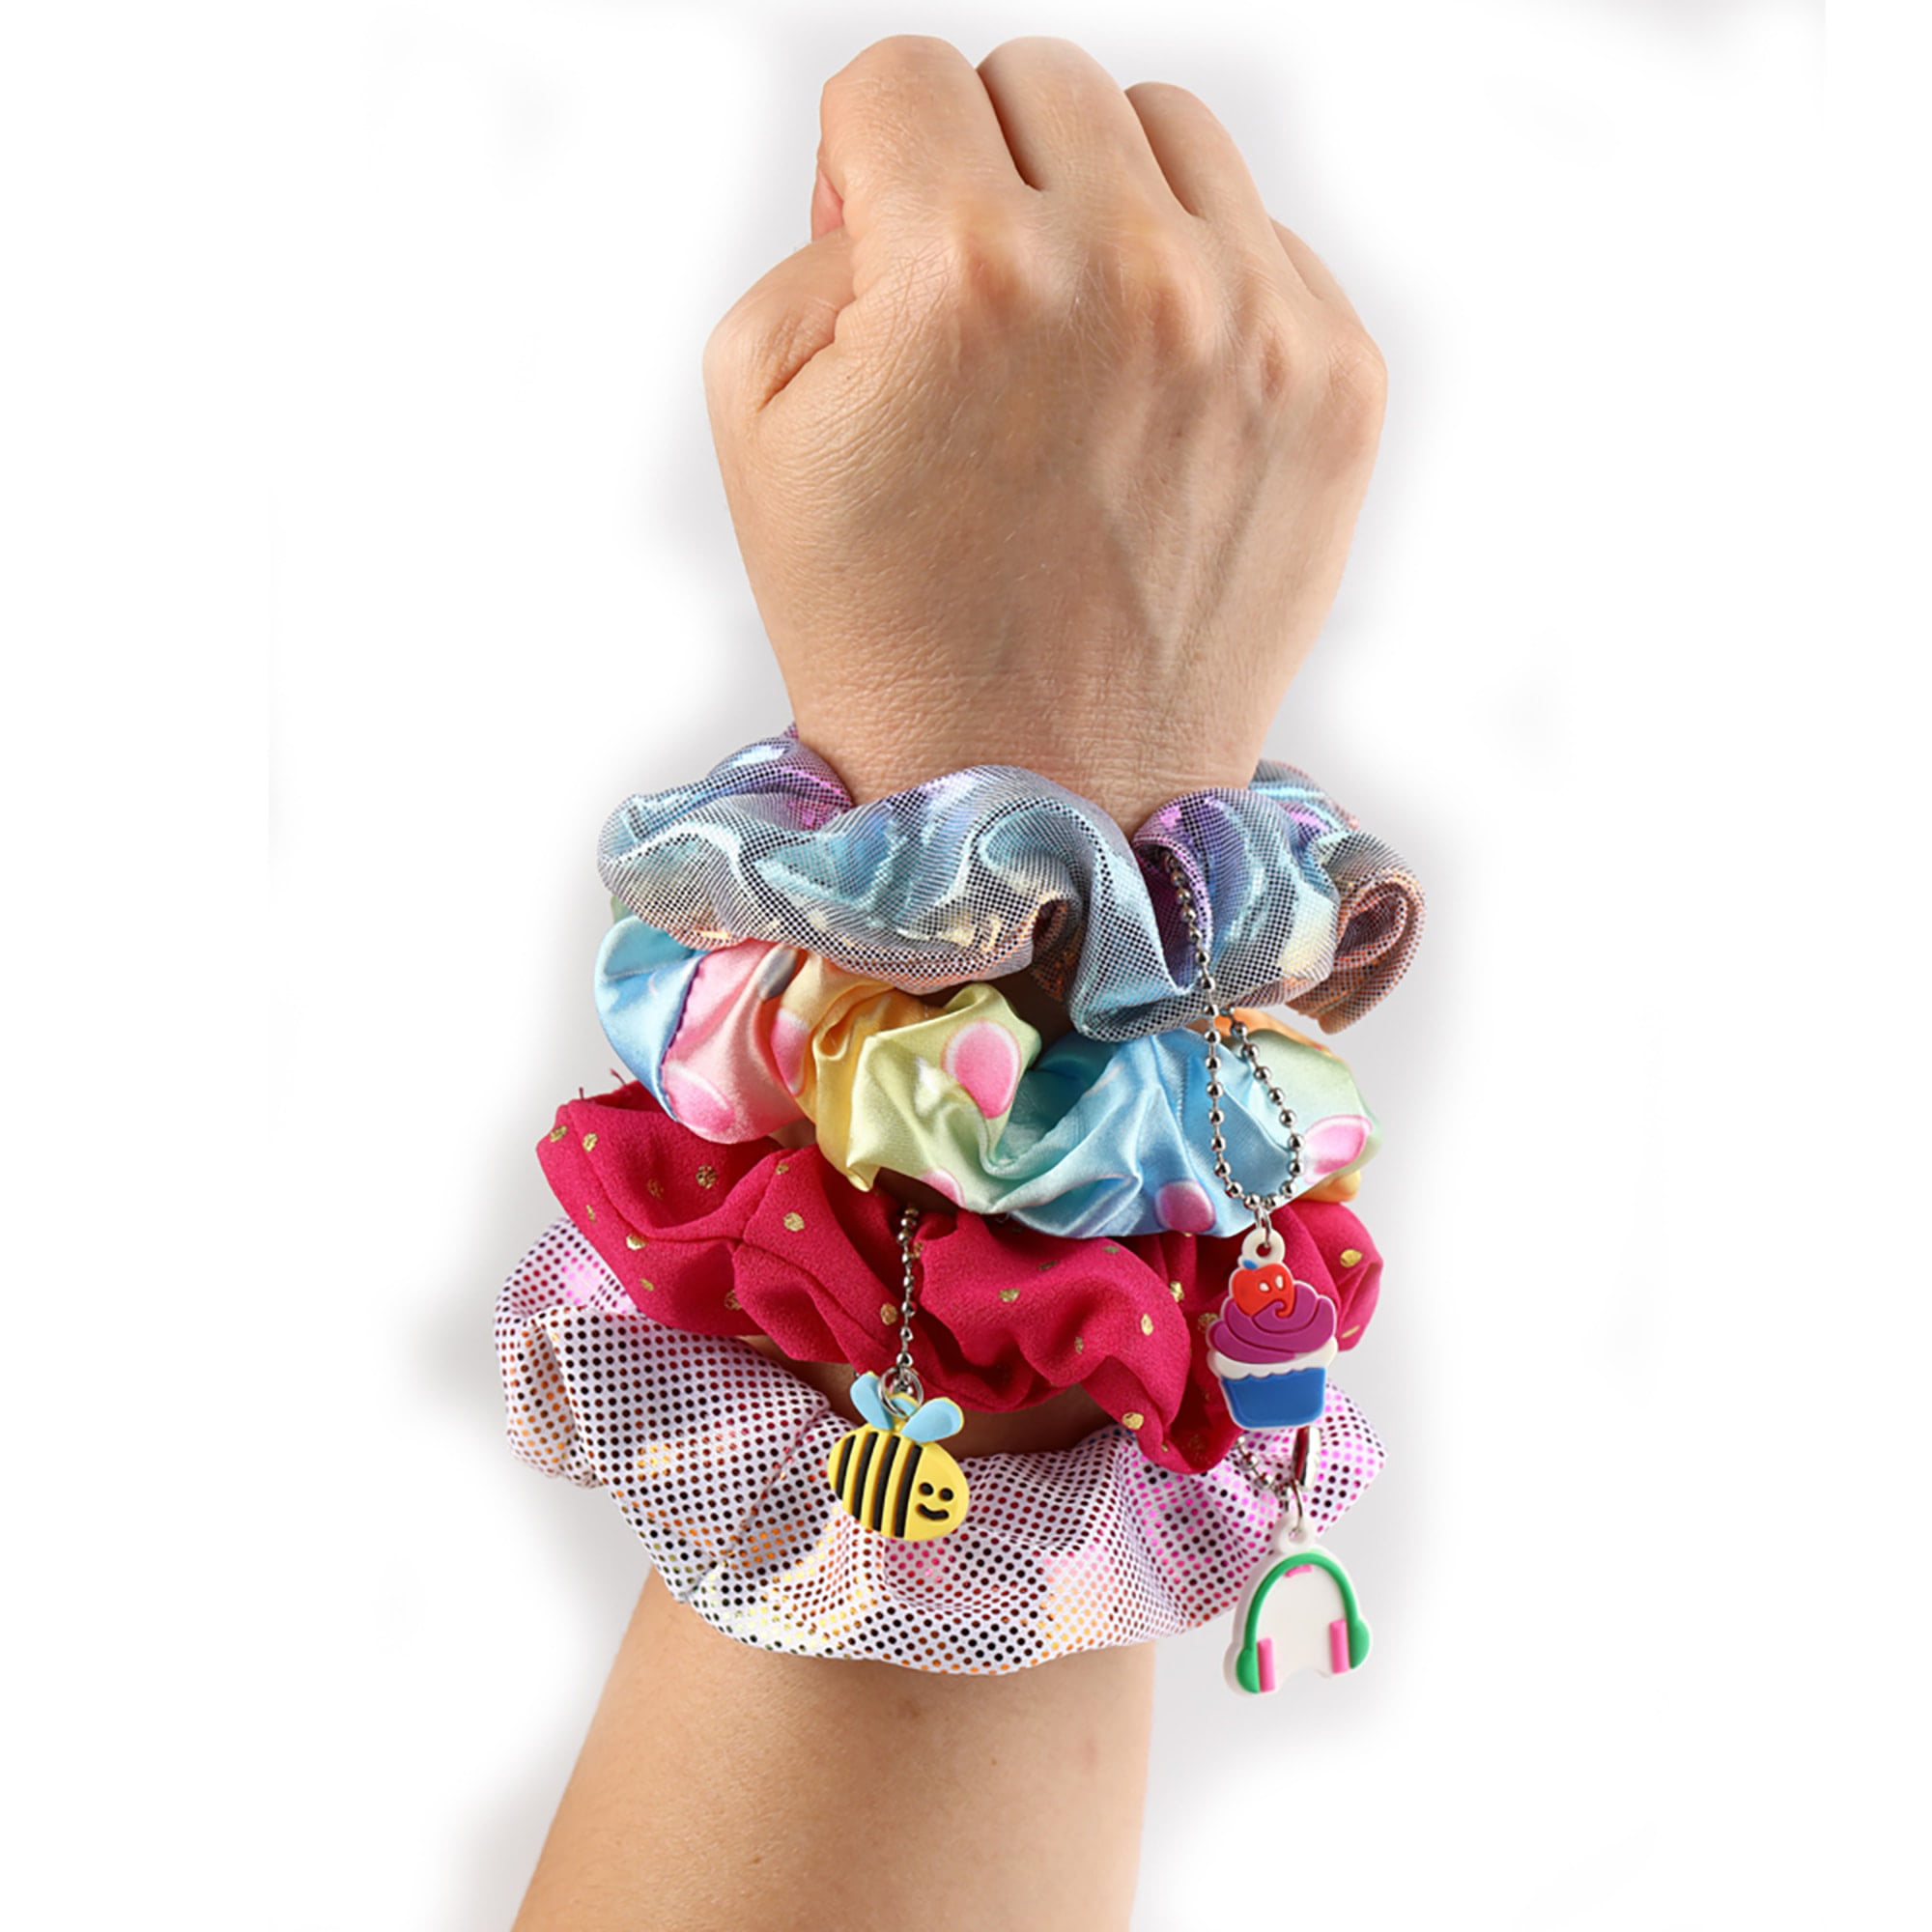 Amav - Fashion Time Bead Threader, Children Ages 6 and Up 